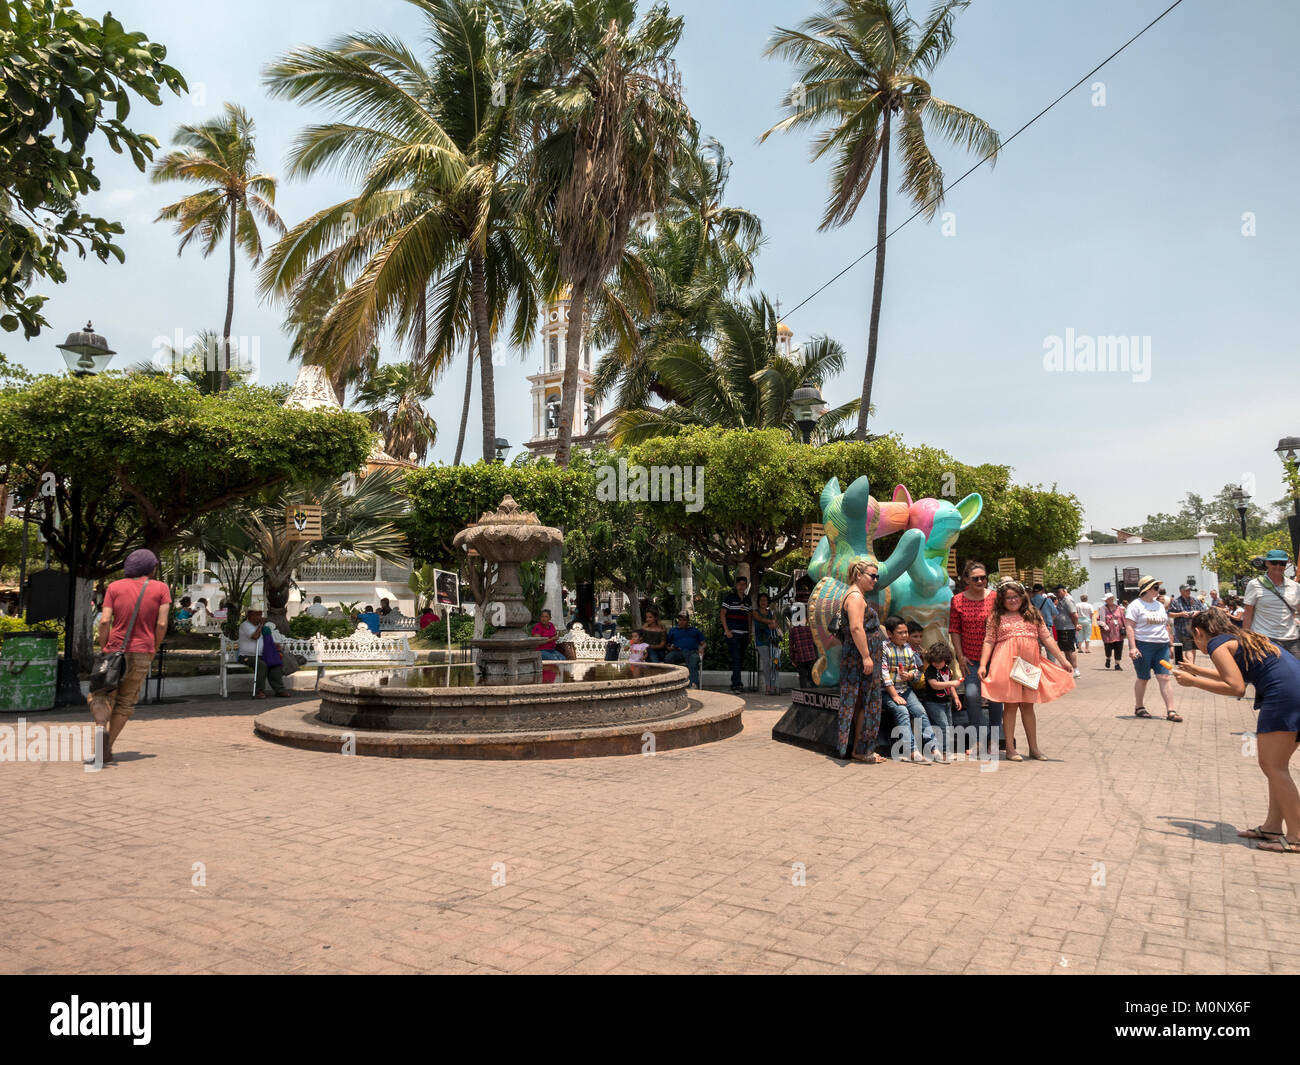 A Family Poses With The Statue Of The Colima Dancing Dogs (Xoloitzcuintle) In The Main Town Square Of Comala Colima Mexico Stock Photo